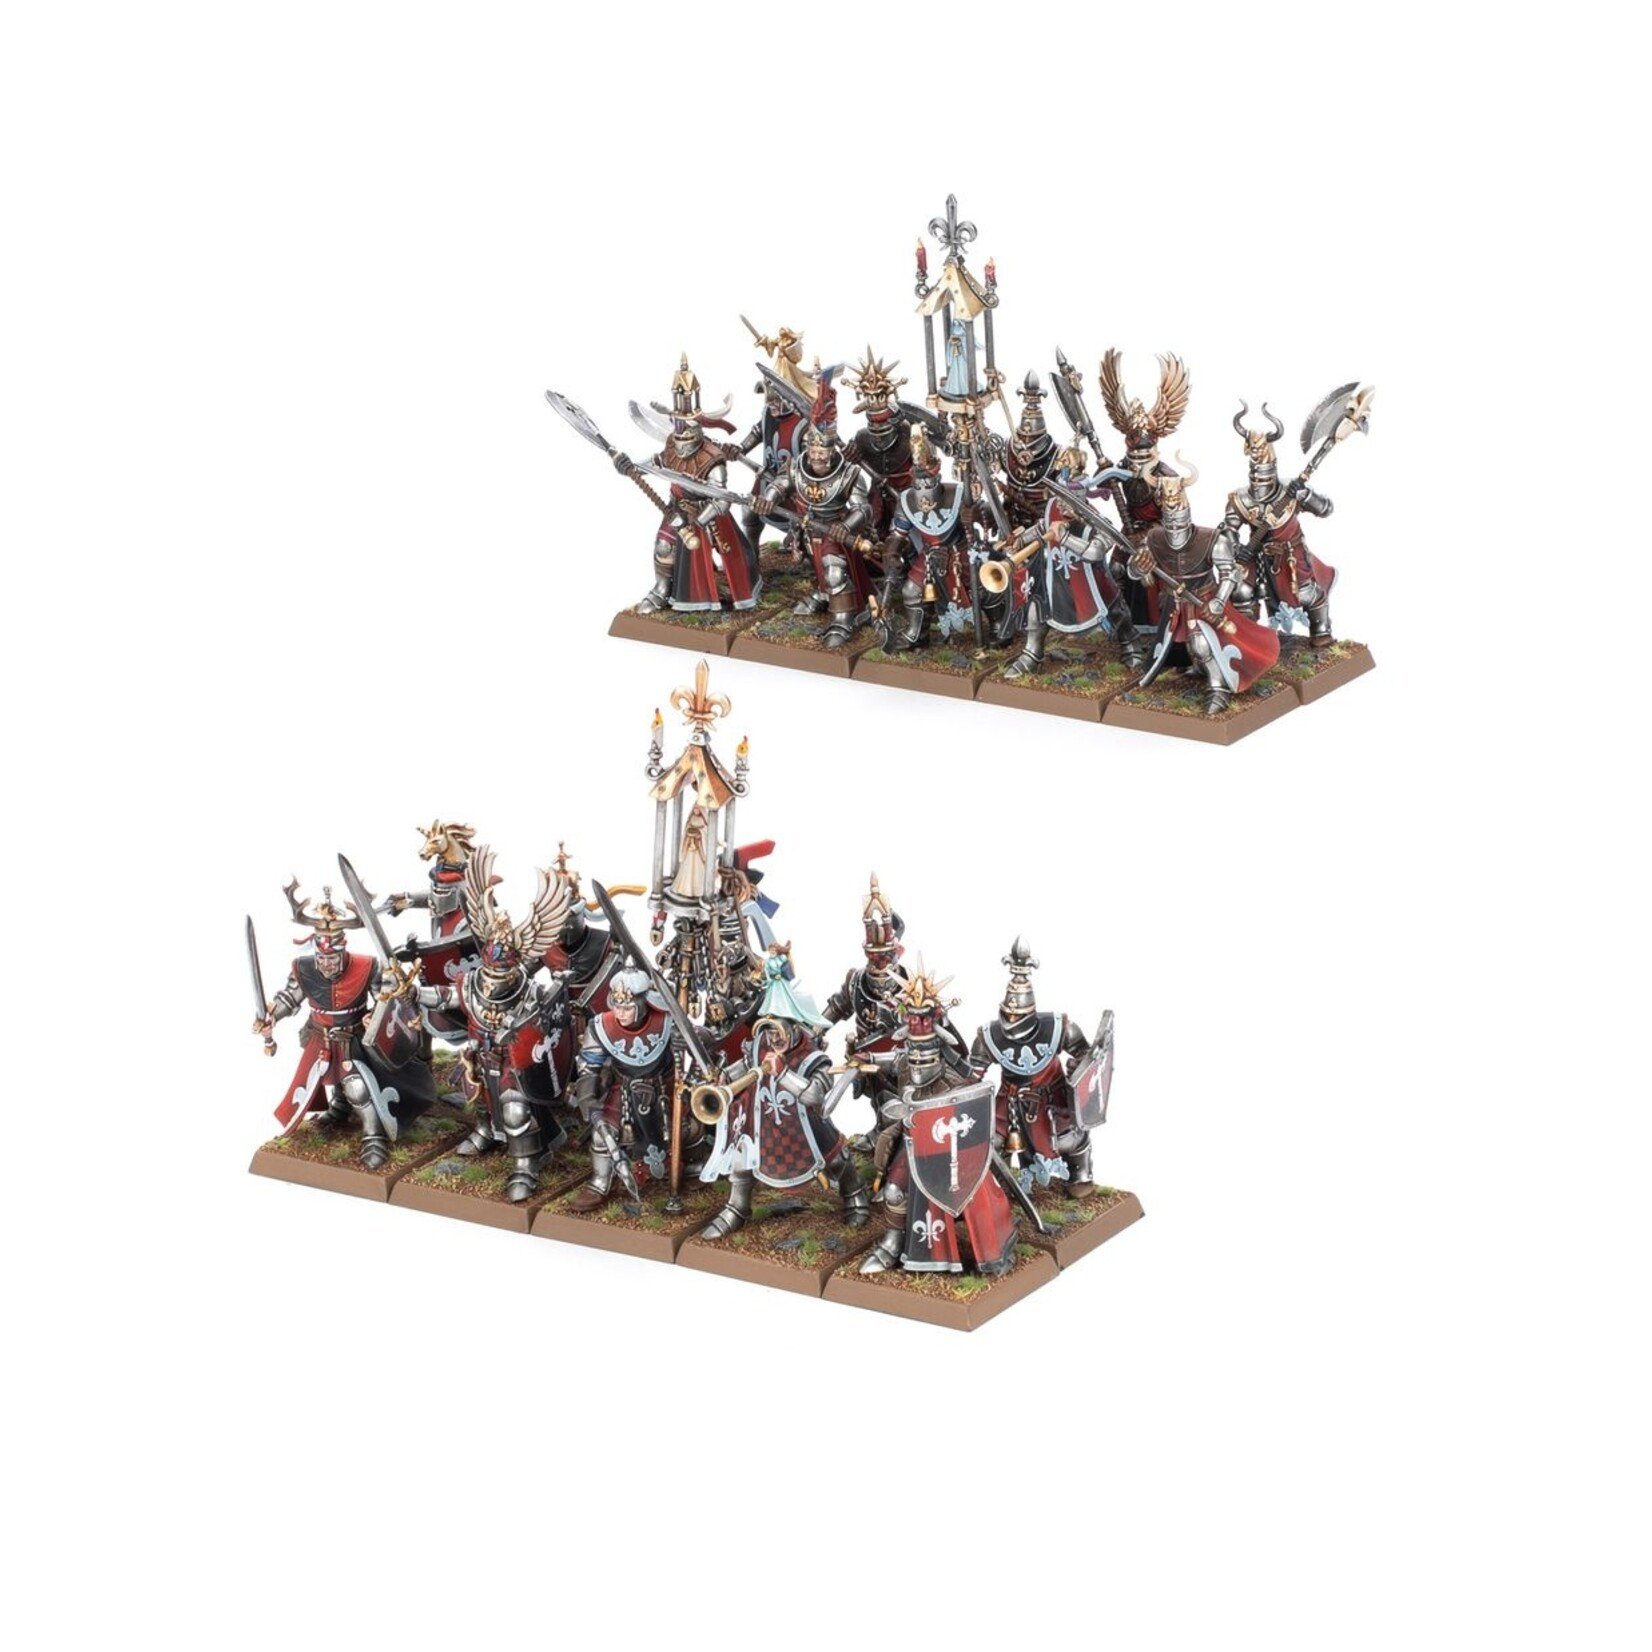 Games Workshop Kingdom of Bretonnia: Knights of the Realm on Foot